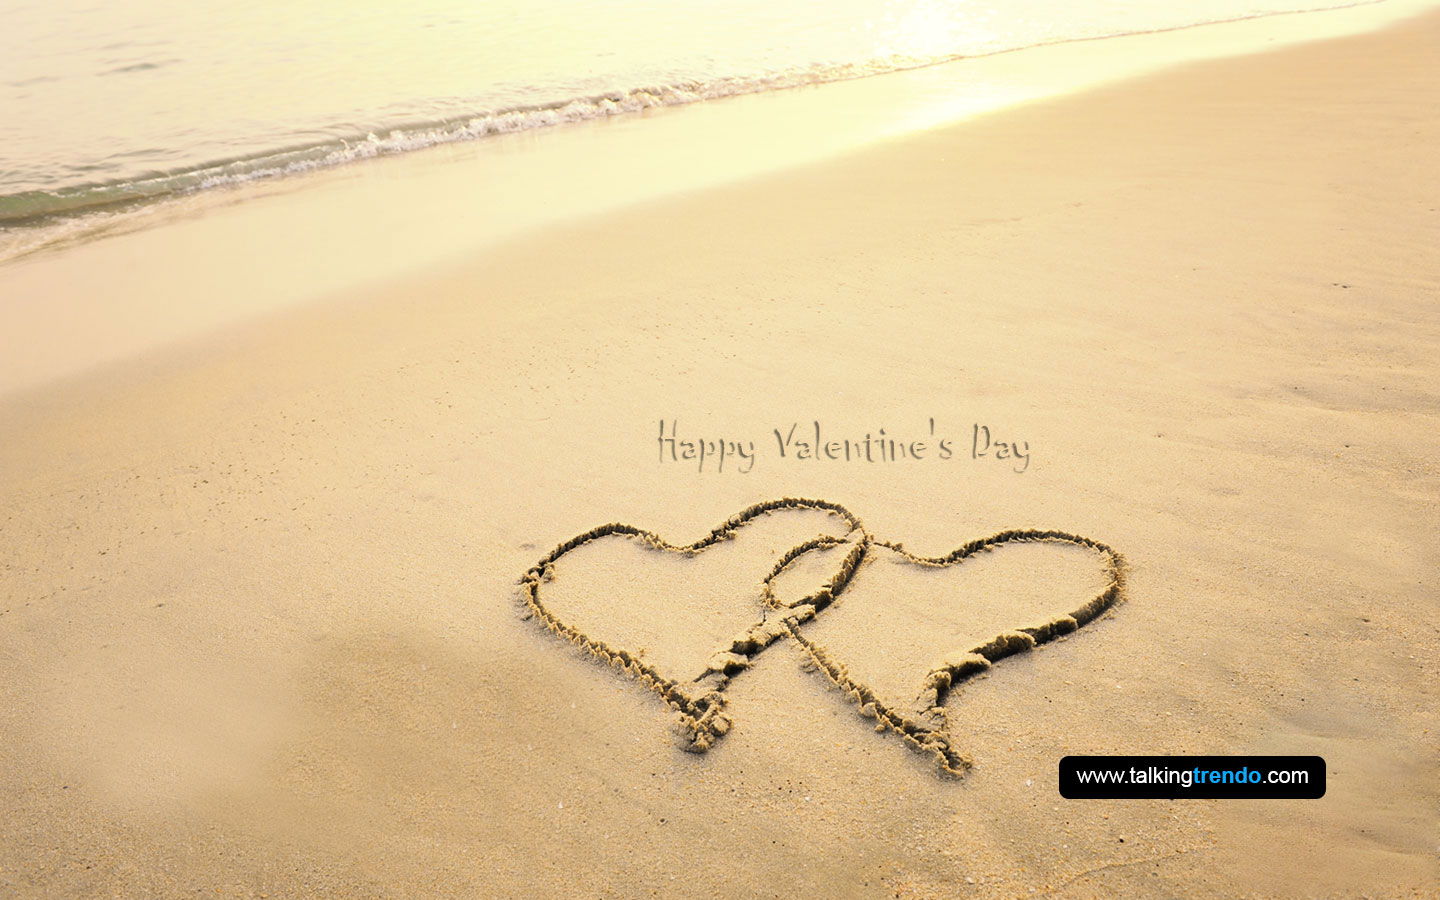 Download Wallpapers of Valentine Day 2018 | HD Images and Photos